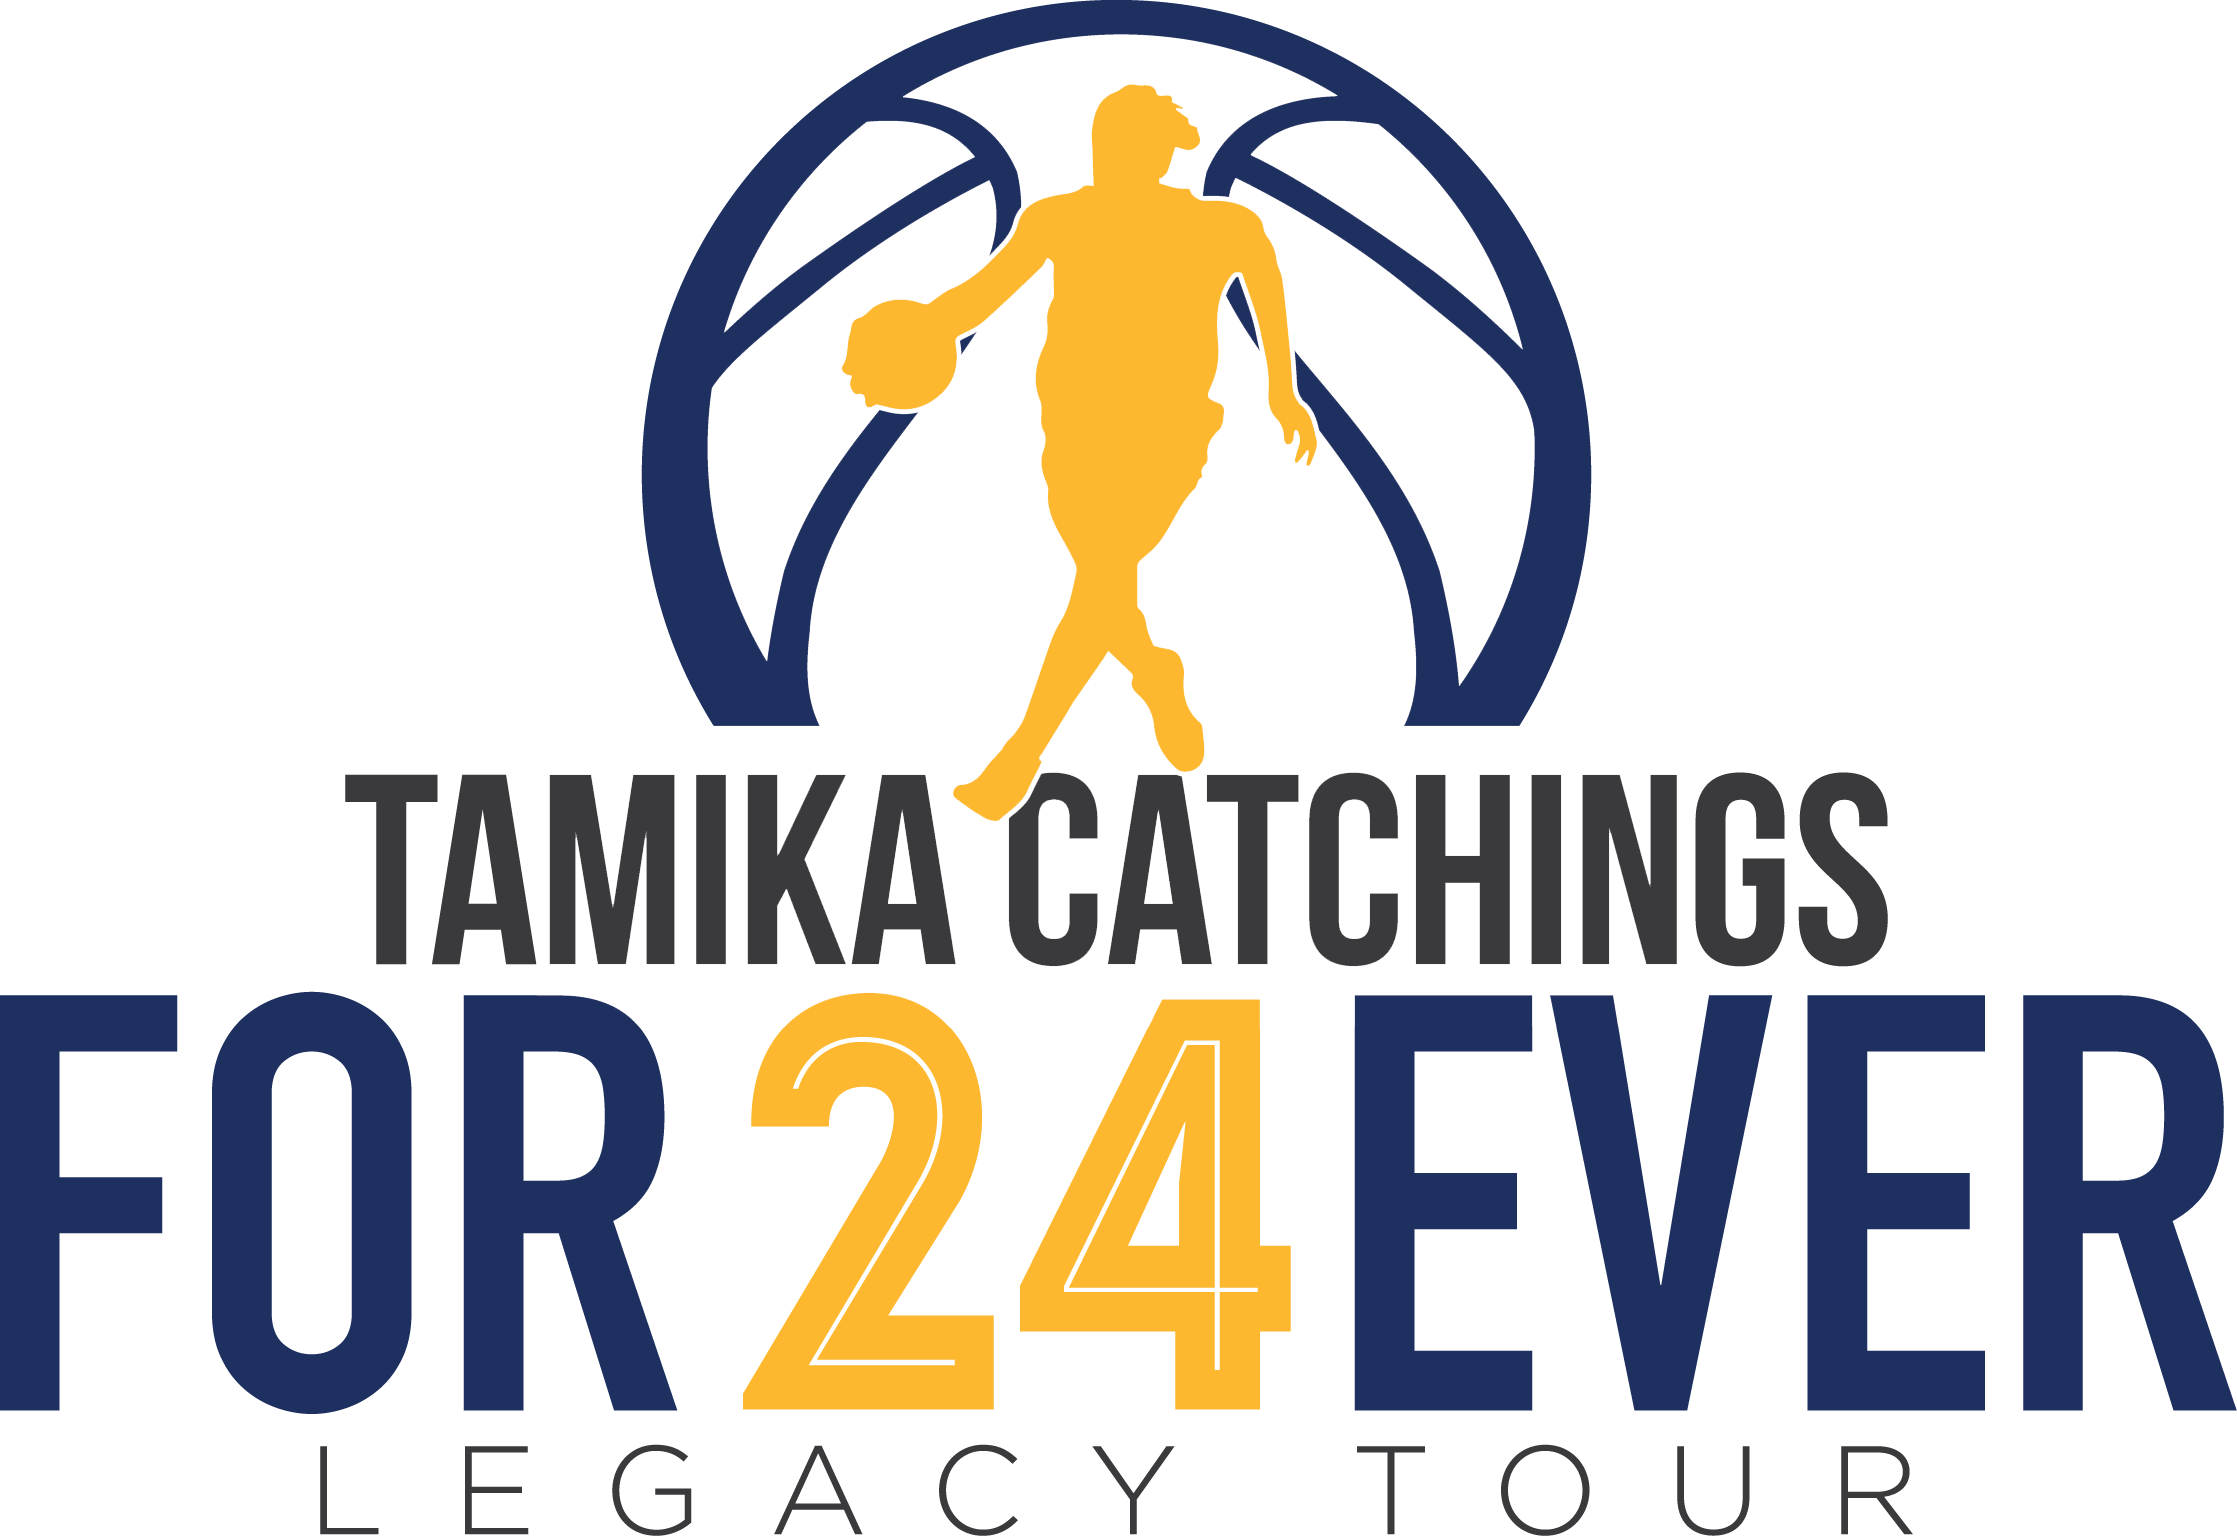 Tamika Catchings FOR24EVER Legacy Tour logo